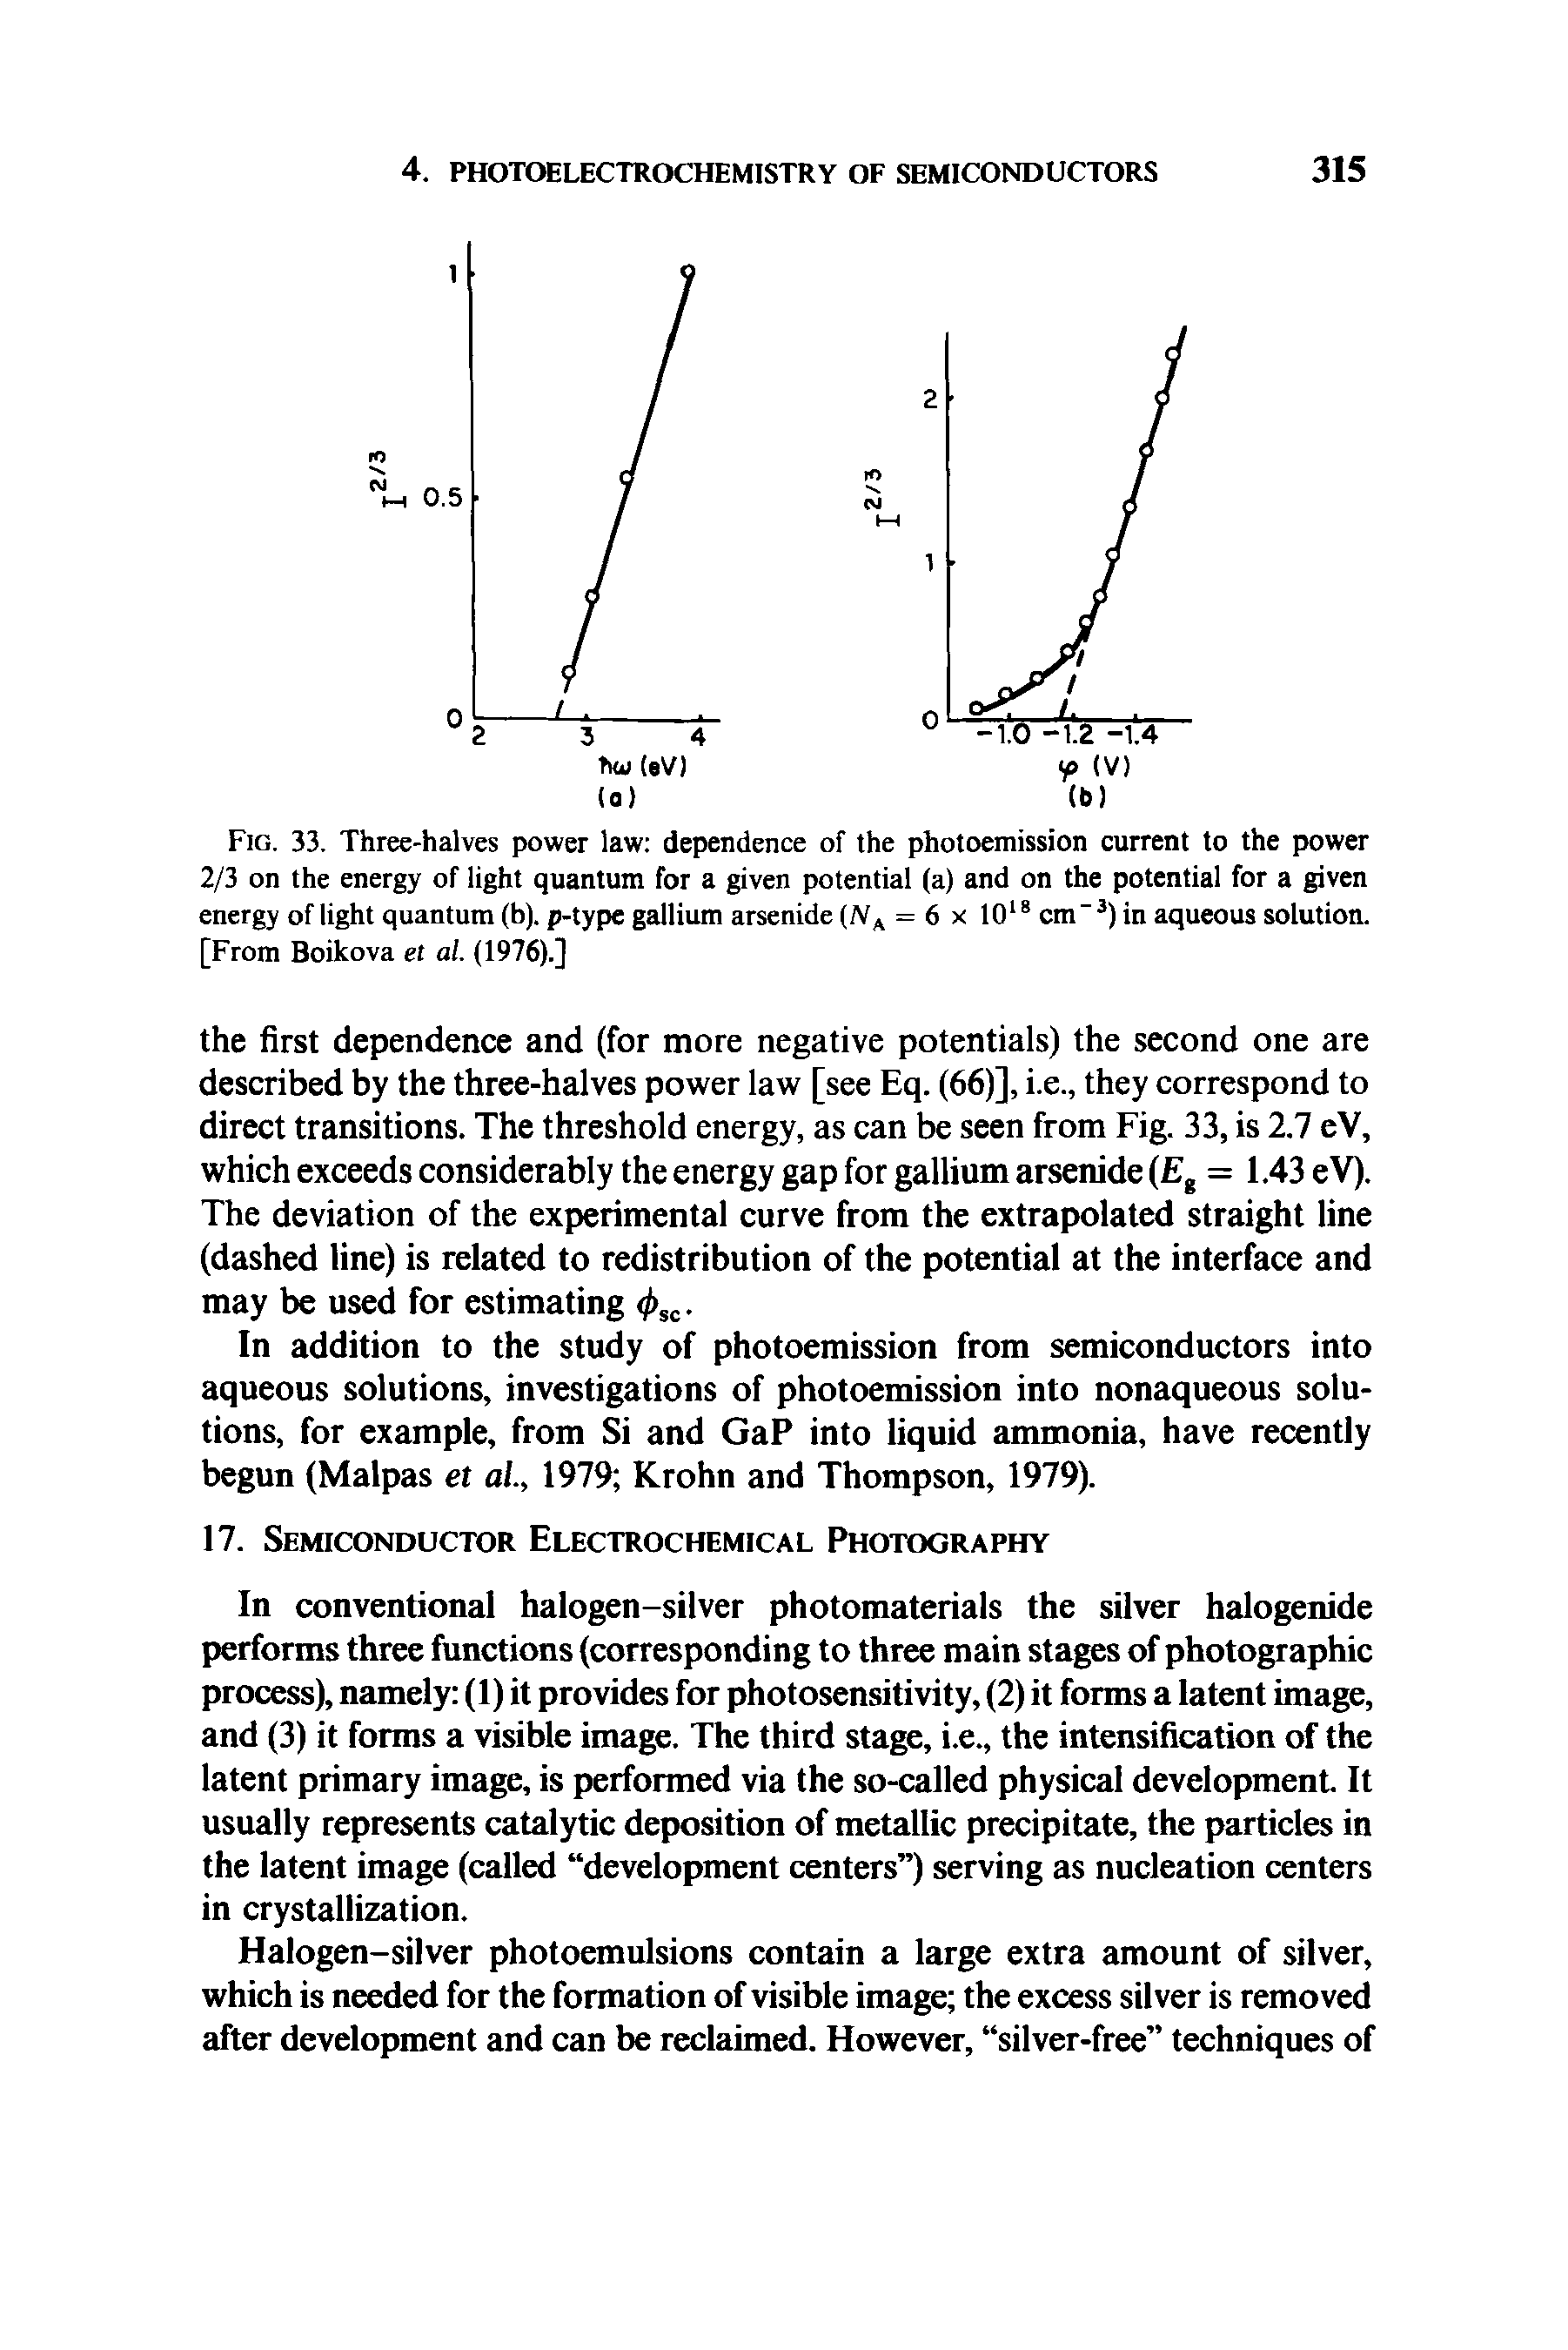 Fig. 33. Three-halves power law dependence of the photoemission current to the power 2/3 on the energy of light quantum for a given potential (a) and on the potential for a given energy of light quantum (b). p- type gallium arsenide (/VA = 6 x 1018 cm-3) in aqueous solution. [From Boikova el al. (1976).]...